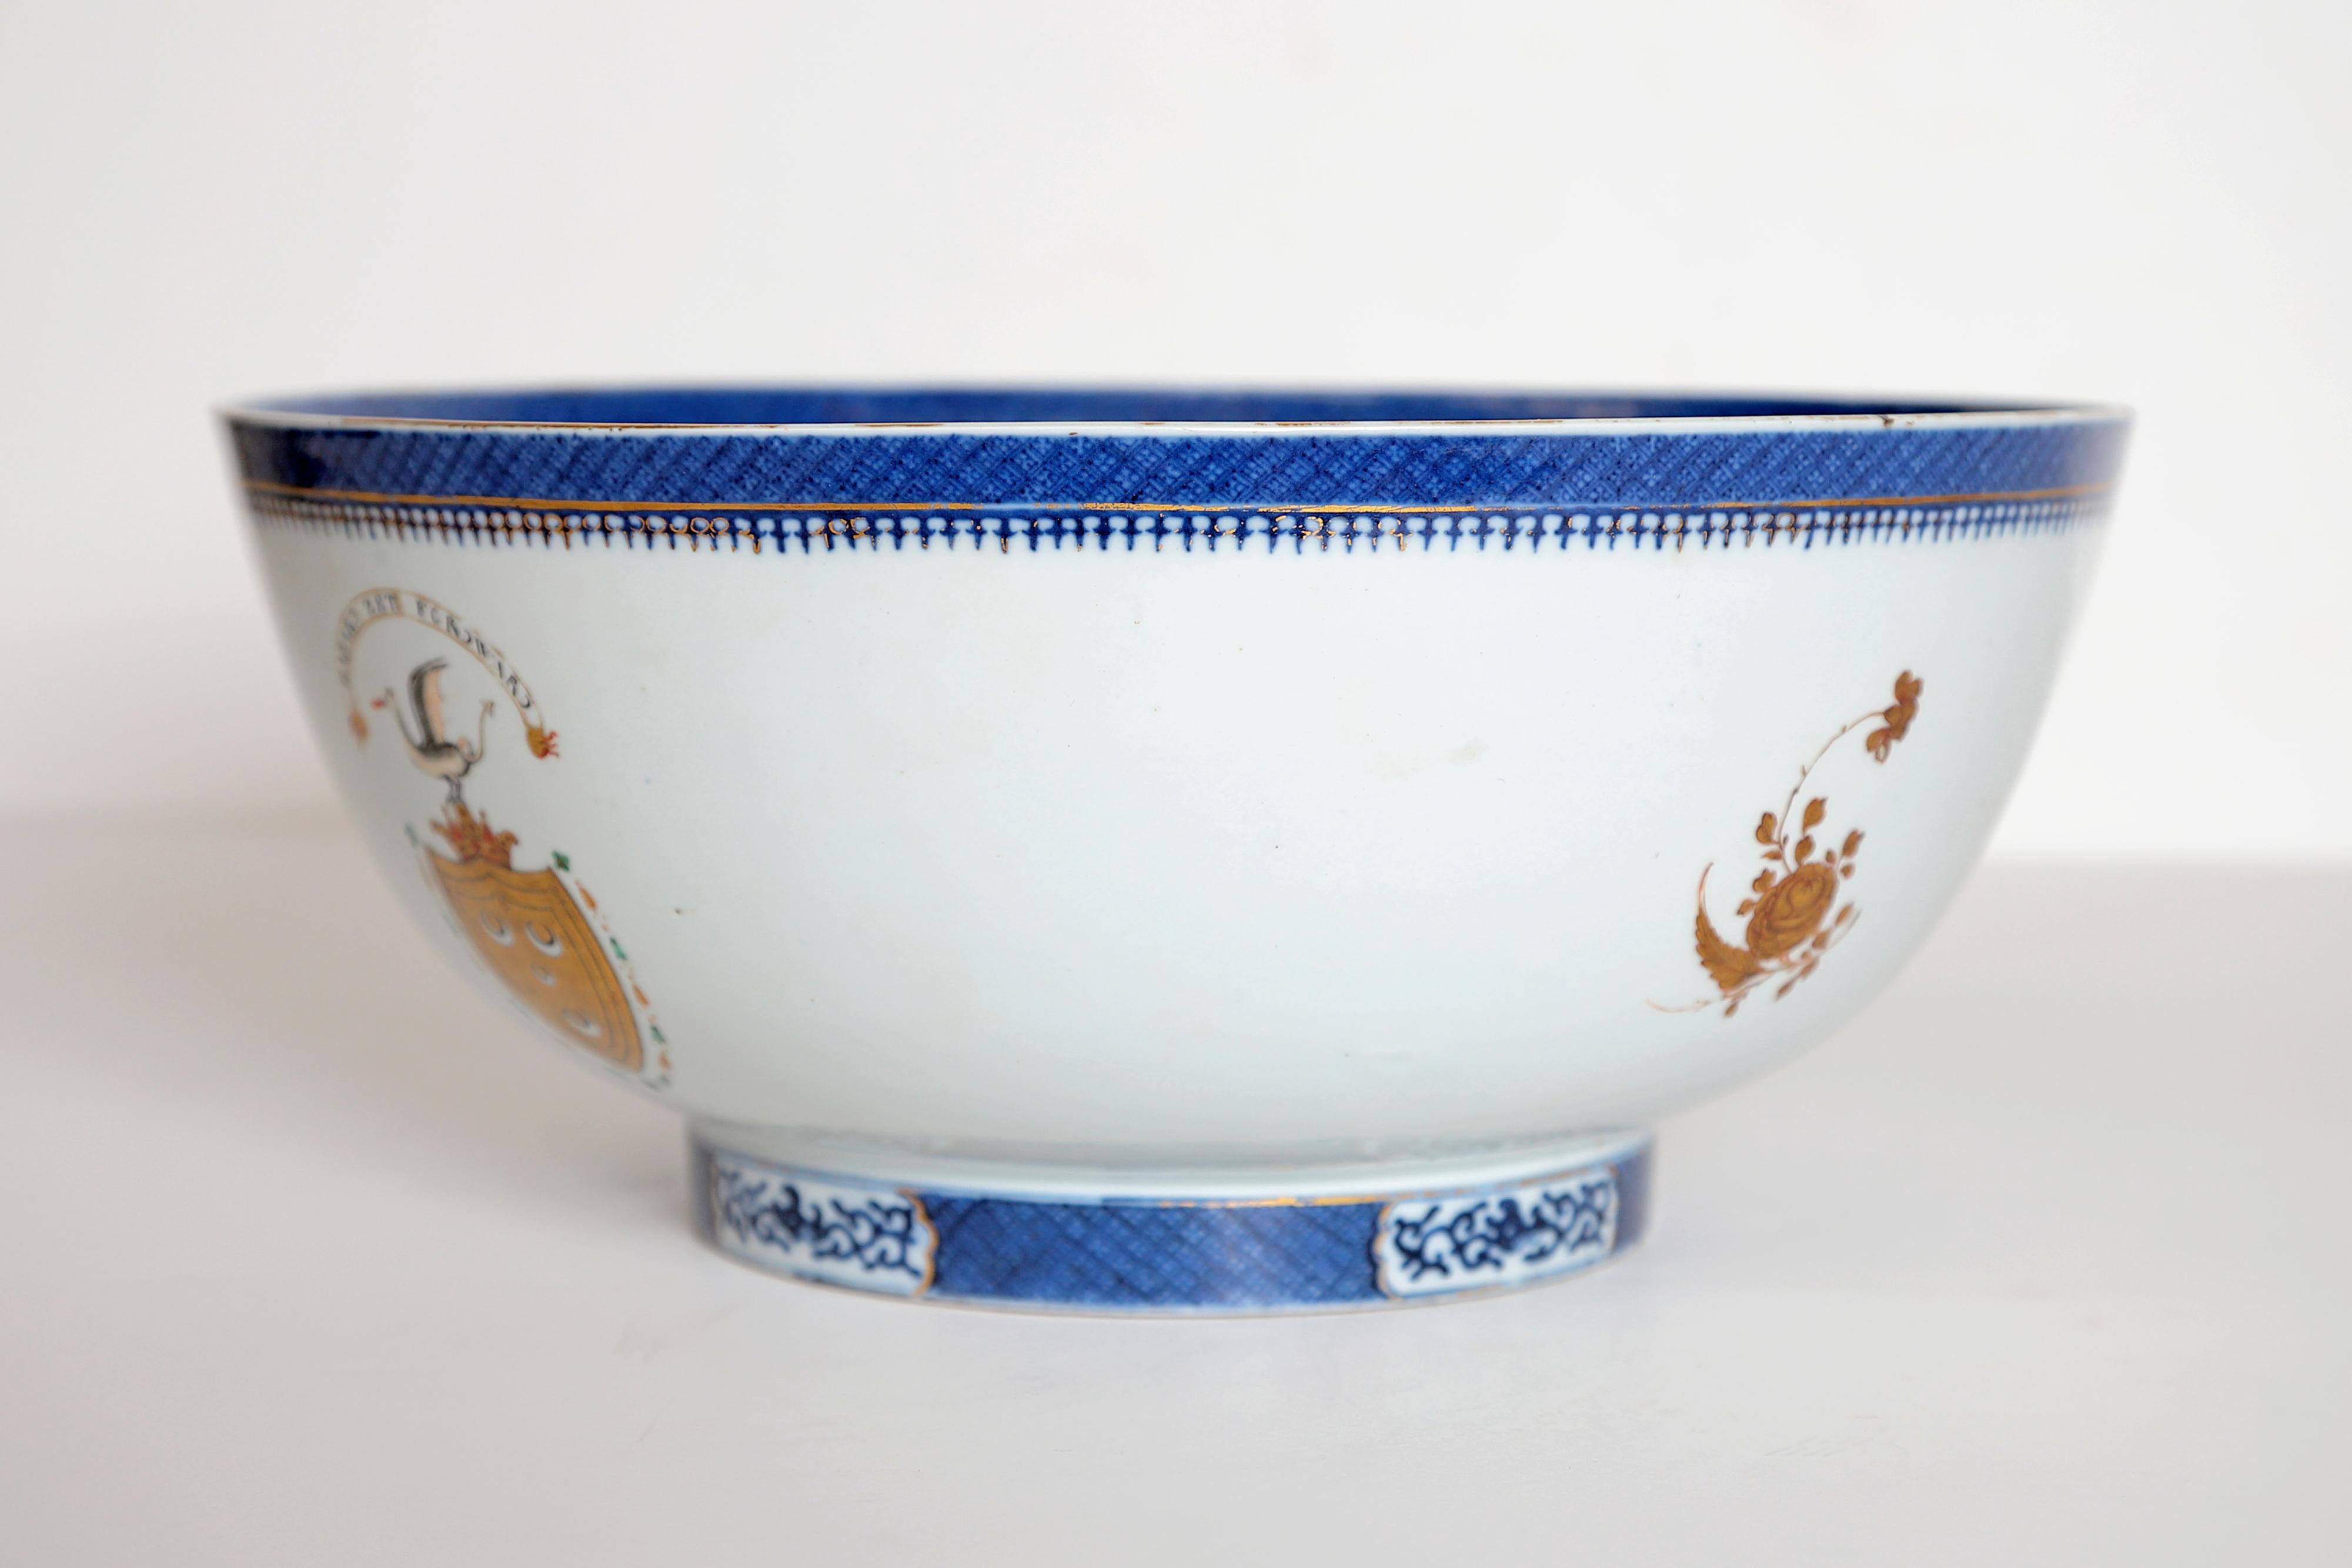 Hand-Painted Chinese Export Armorial Punch Bowl / from a Service for Daniel Seton, Surat 1795